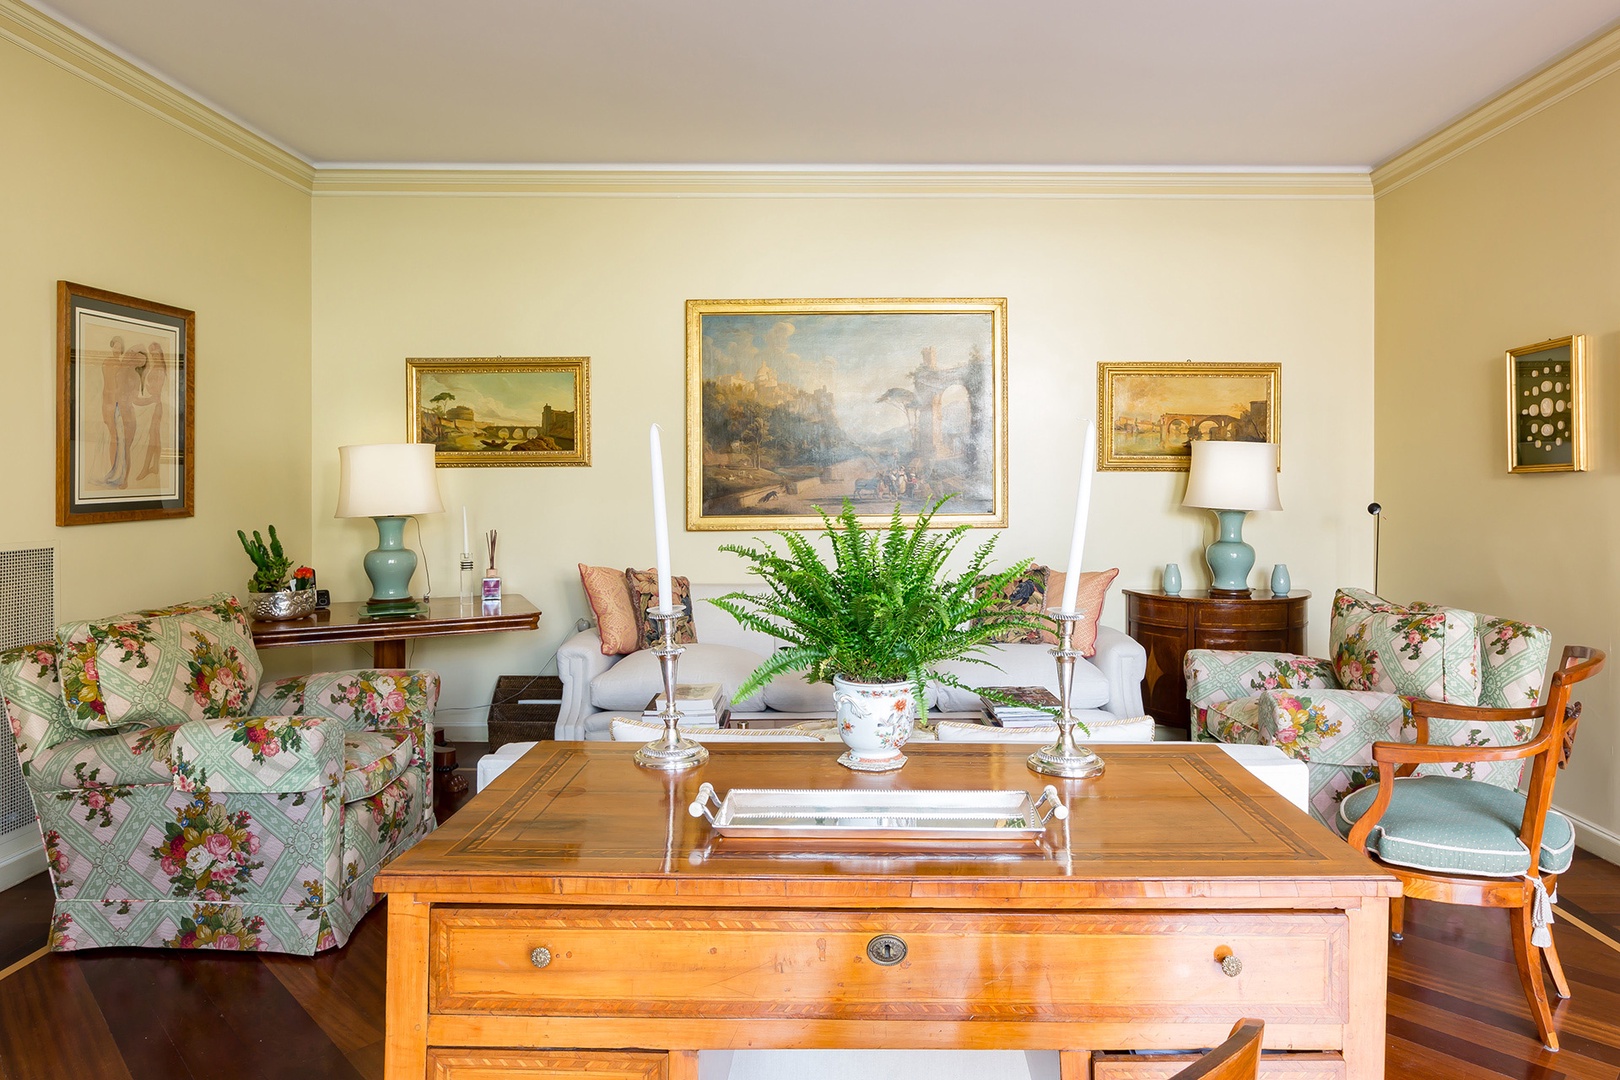 Fine oil paintings of Rome and the Roman countryside decorate the walls of the sunny living room.